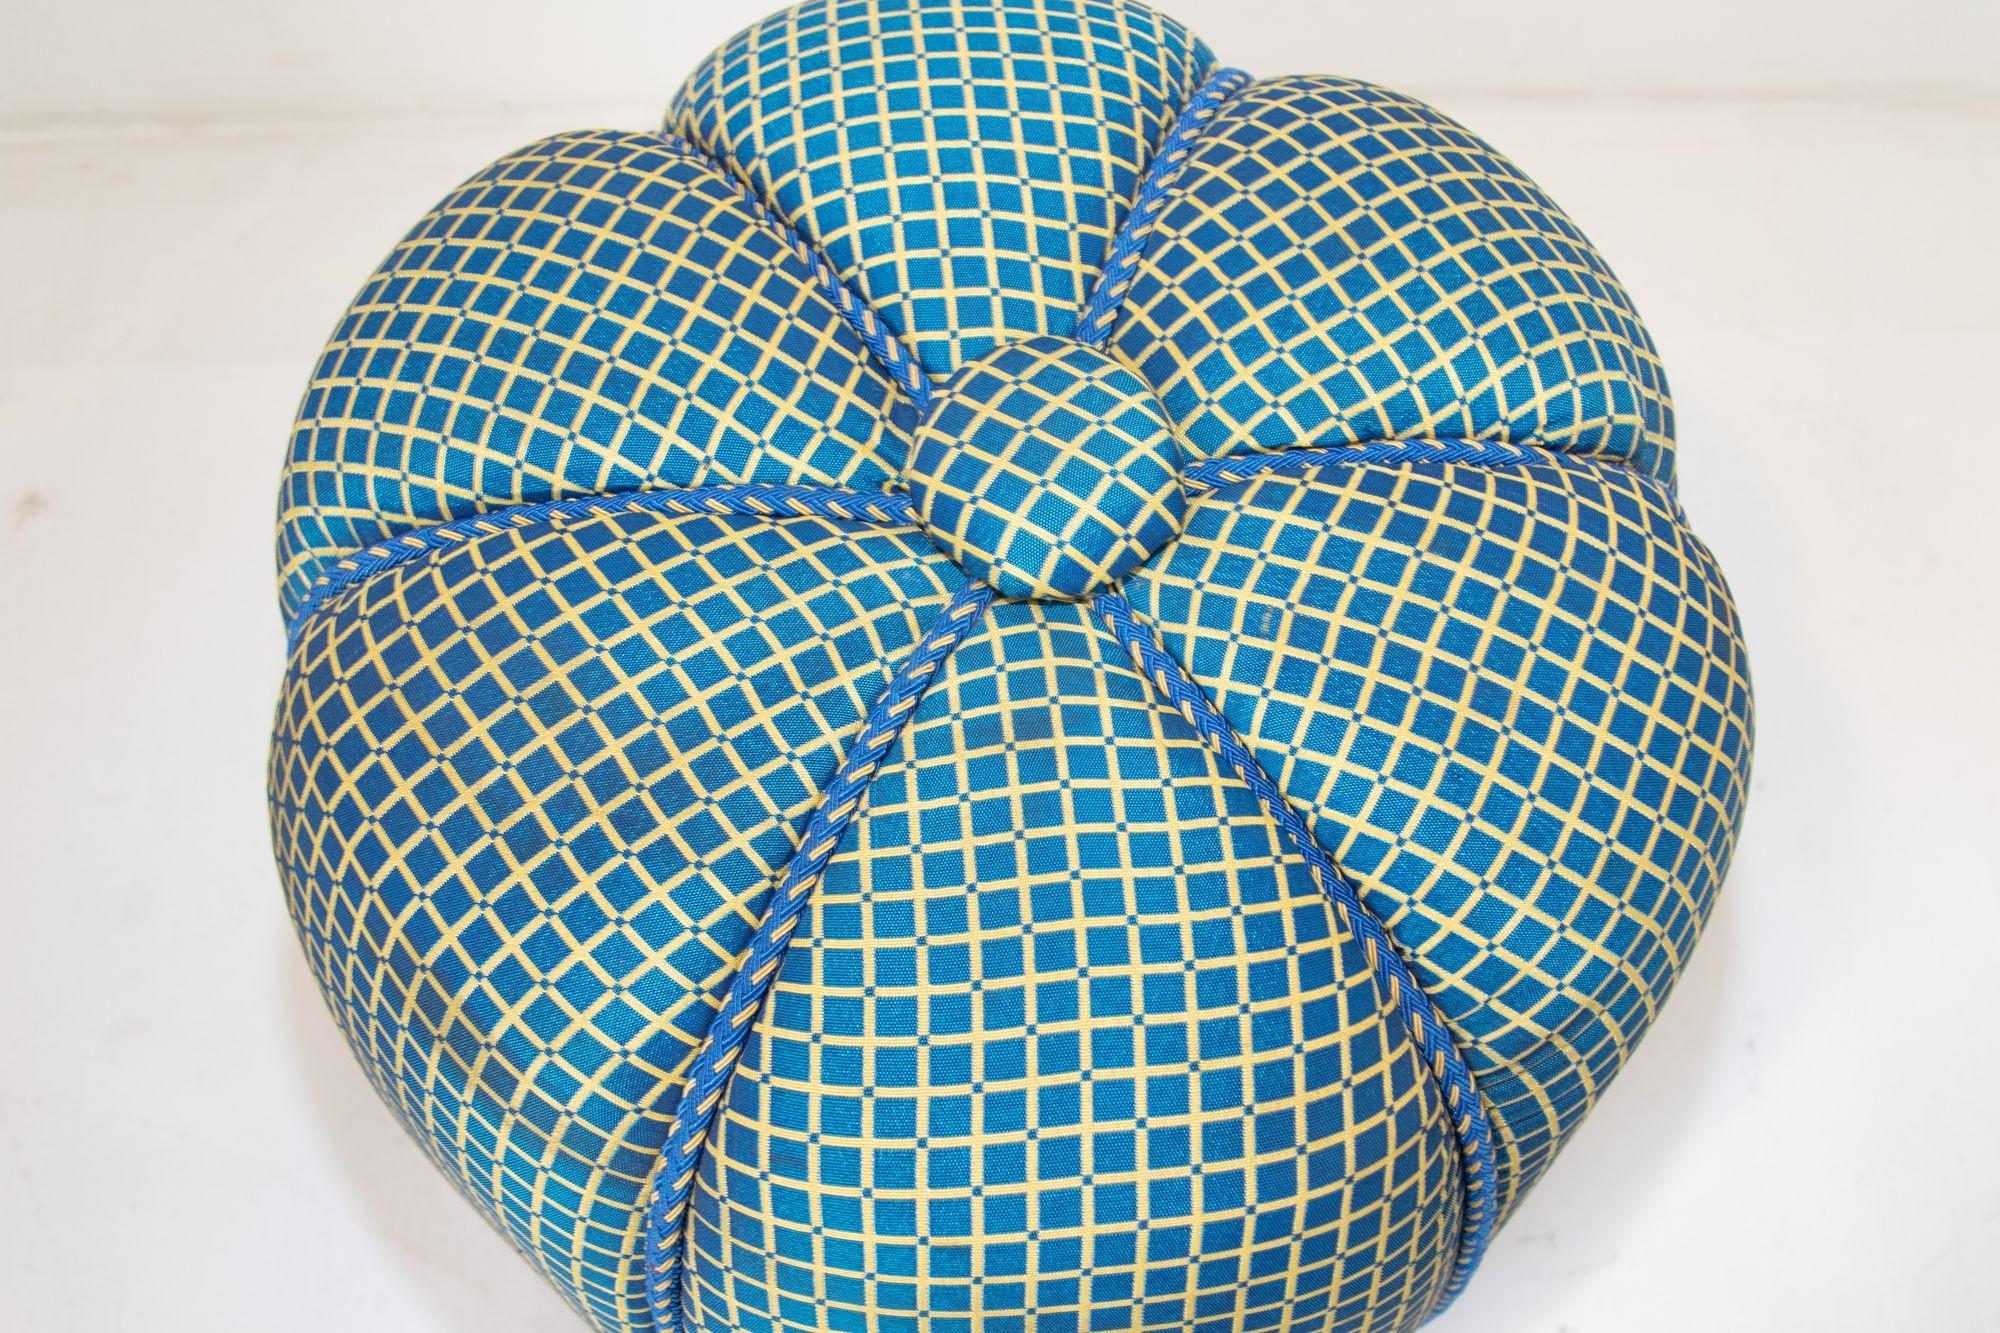 Vintage Art Deco Style Pouf Turquoise Upholstered Round Stool For Sale 1